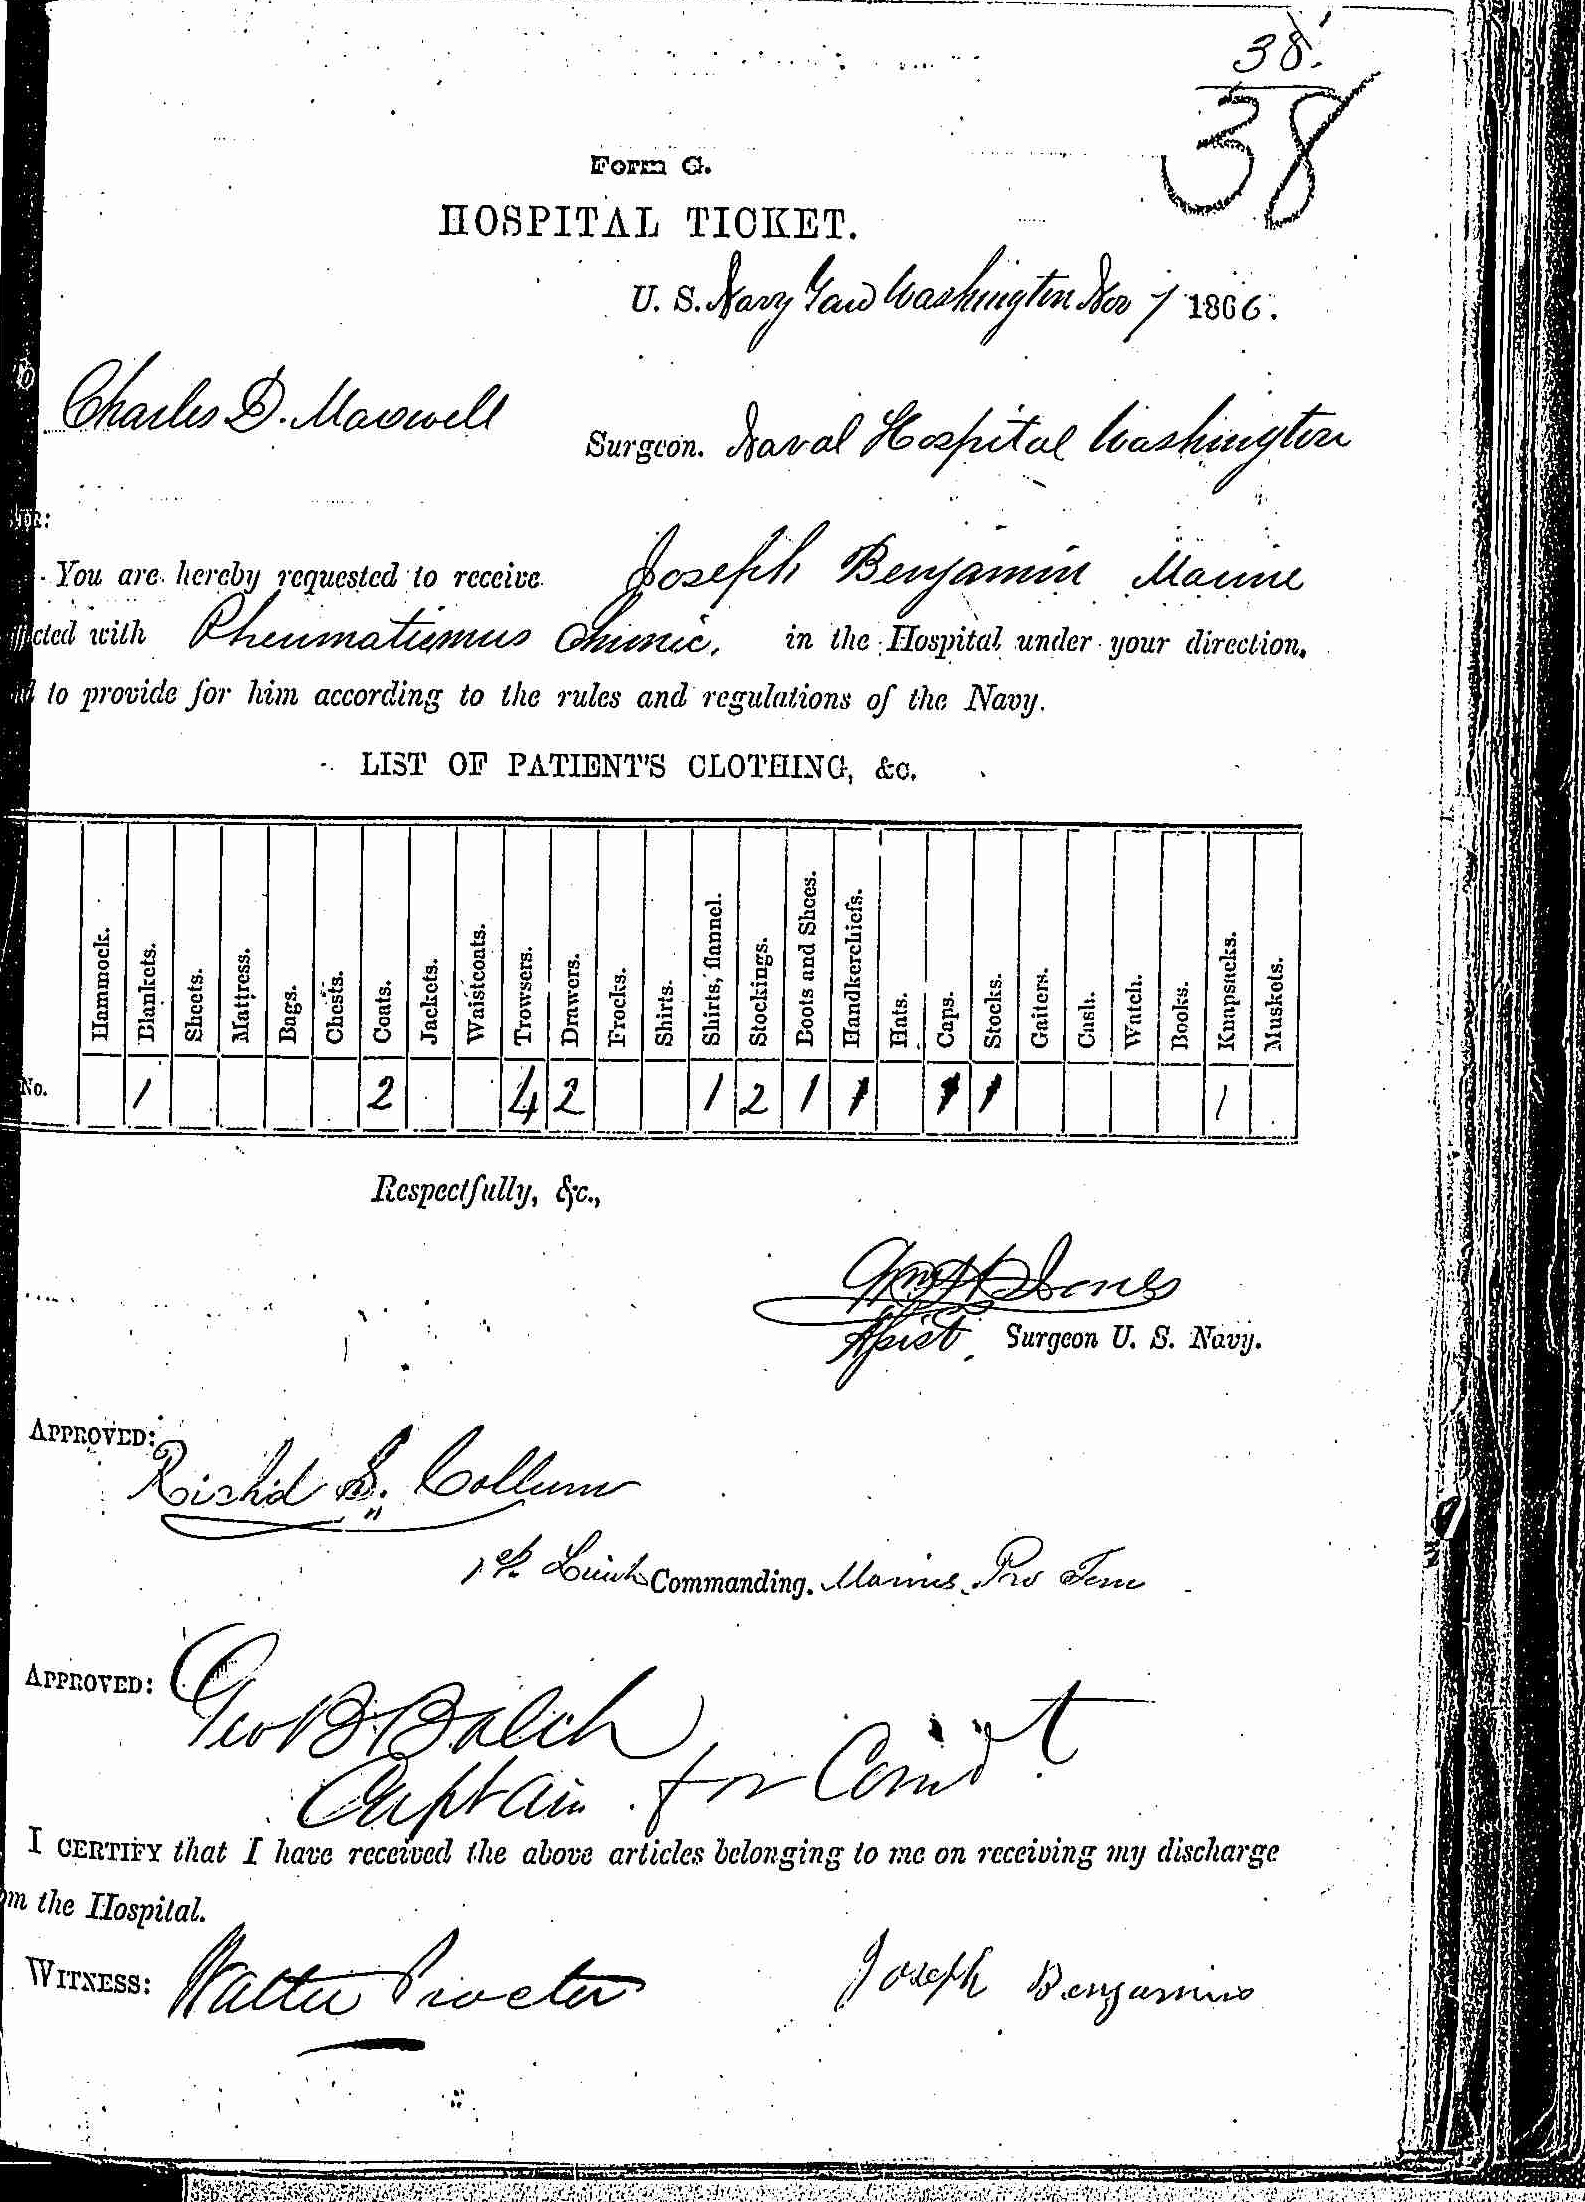 Entry for Joseph Benjamin (second admission page 1 of 2) in the log Hospital Tickets and Case Papers - Naval Hospital - Washington, D.C. - 1865-68